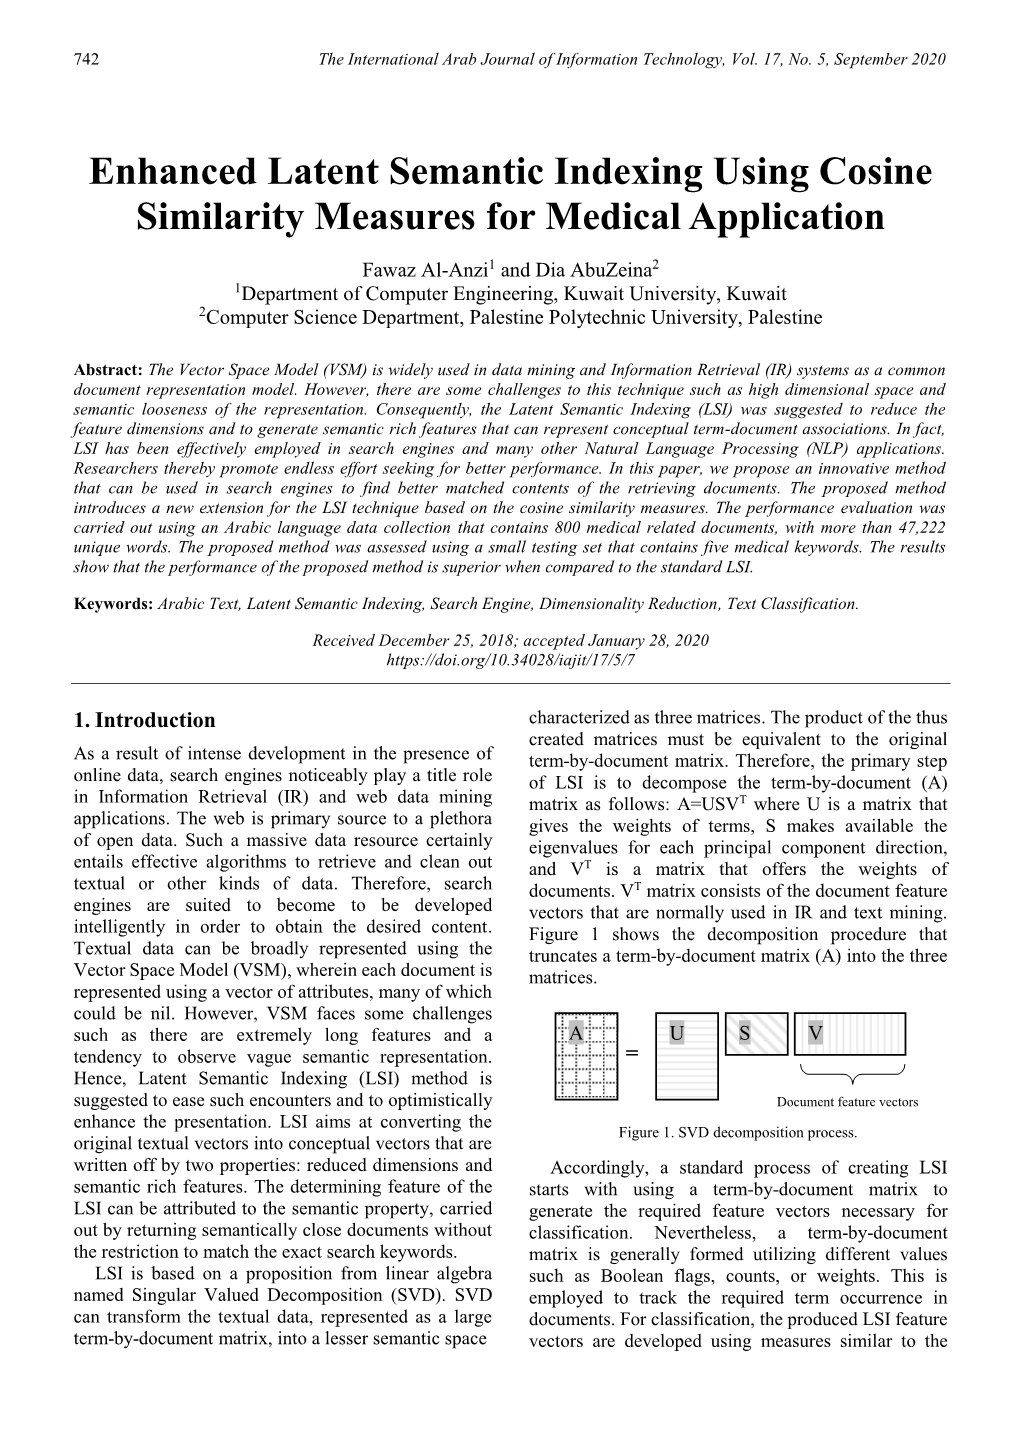 Enhanced Latent Semantic Indexing Using Cosine Similarity Measures for Medical Application